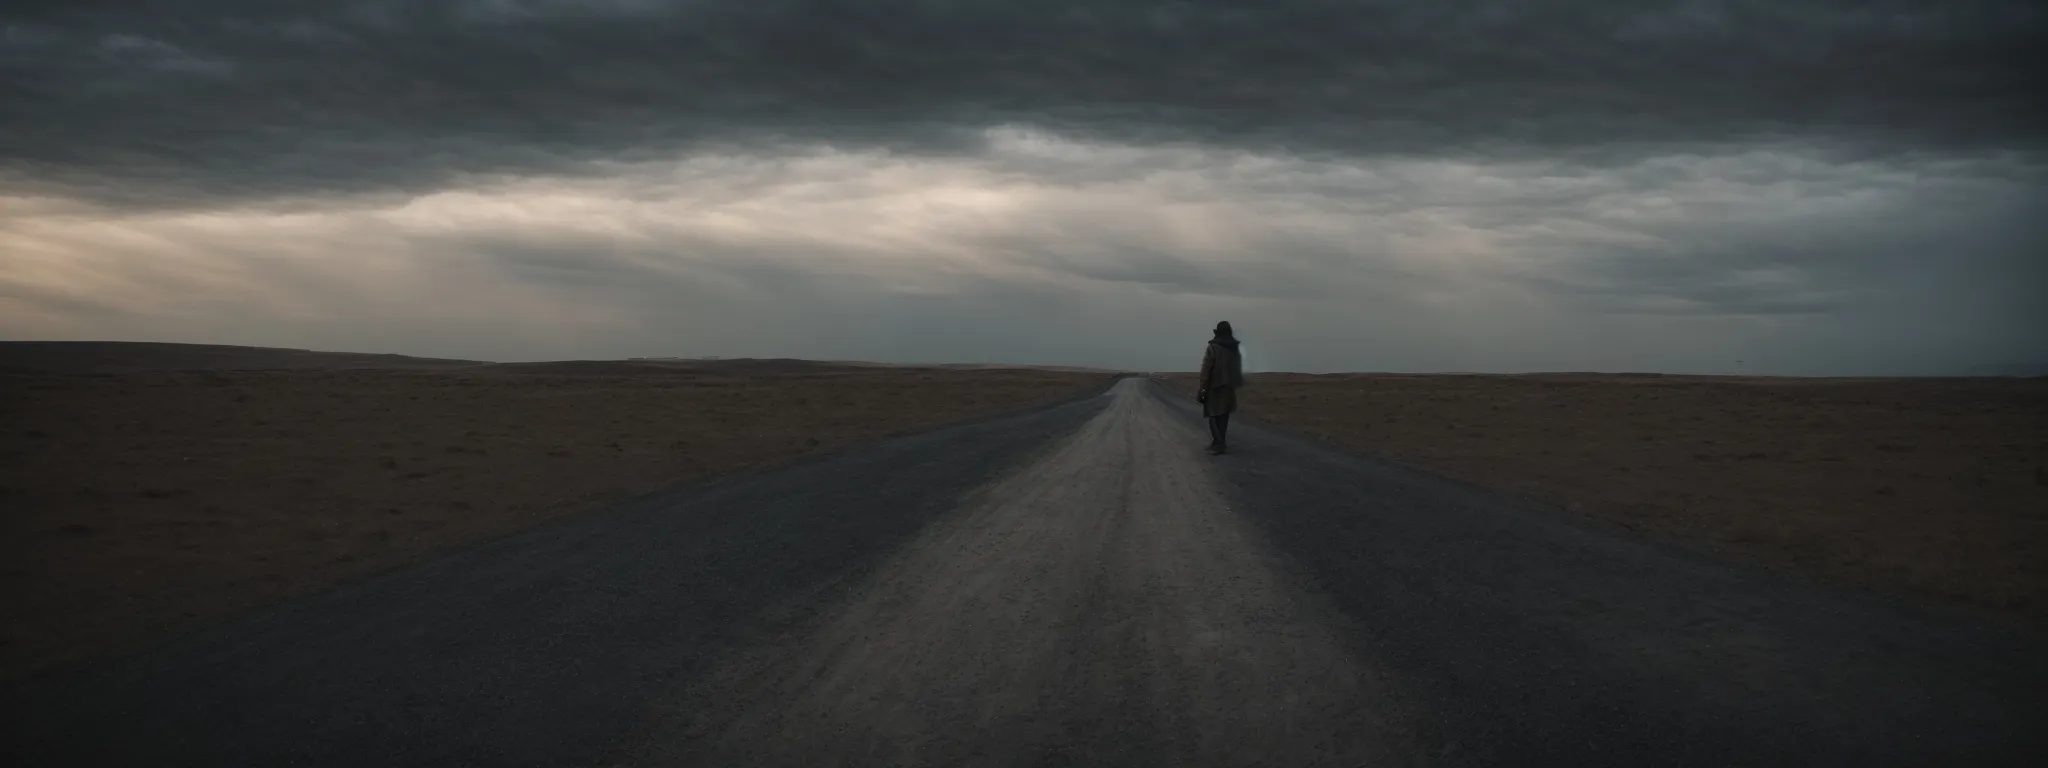 a figure stands at a crossroads with shadowy paths leading to obscured horizons under a dynamic sky.